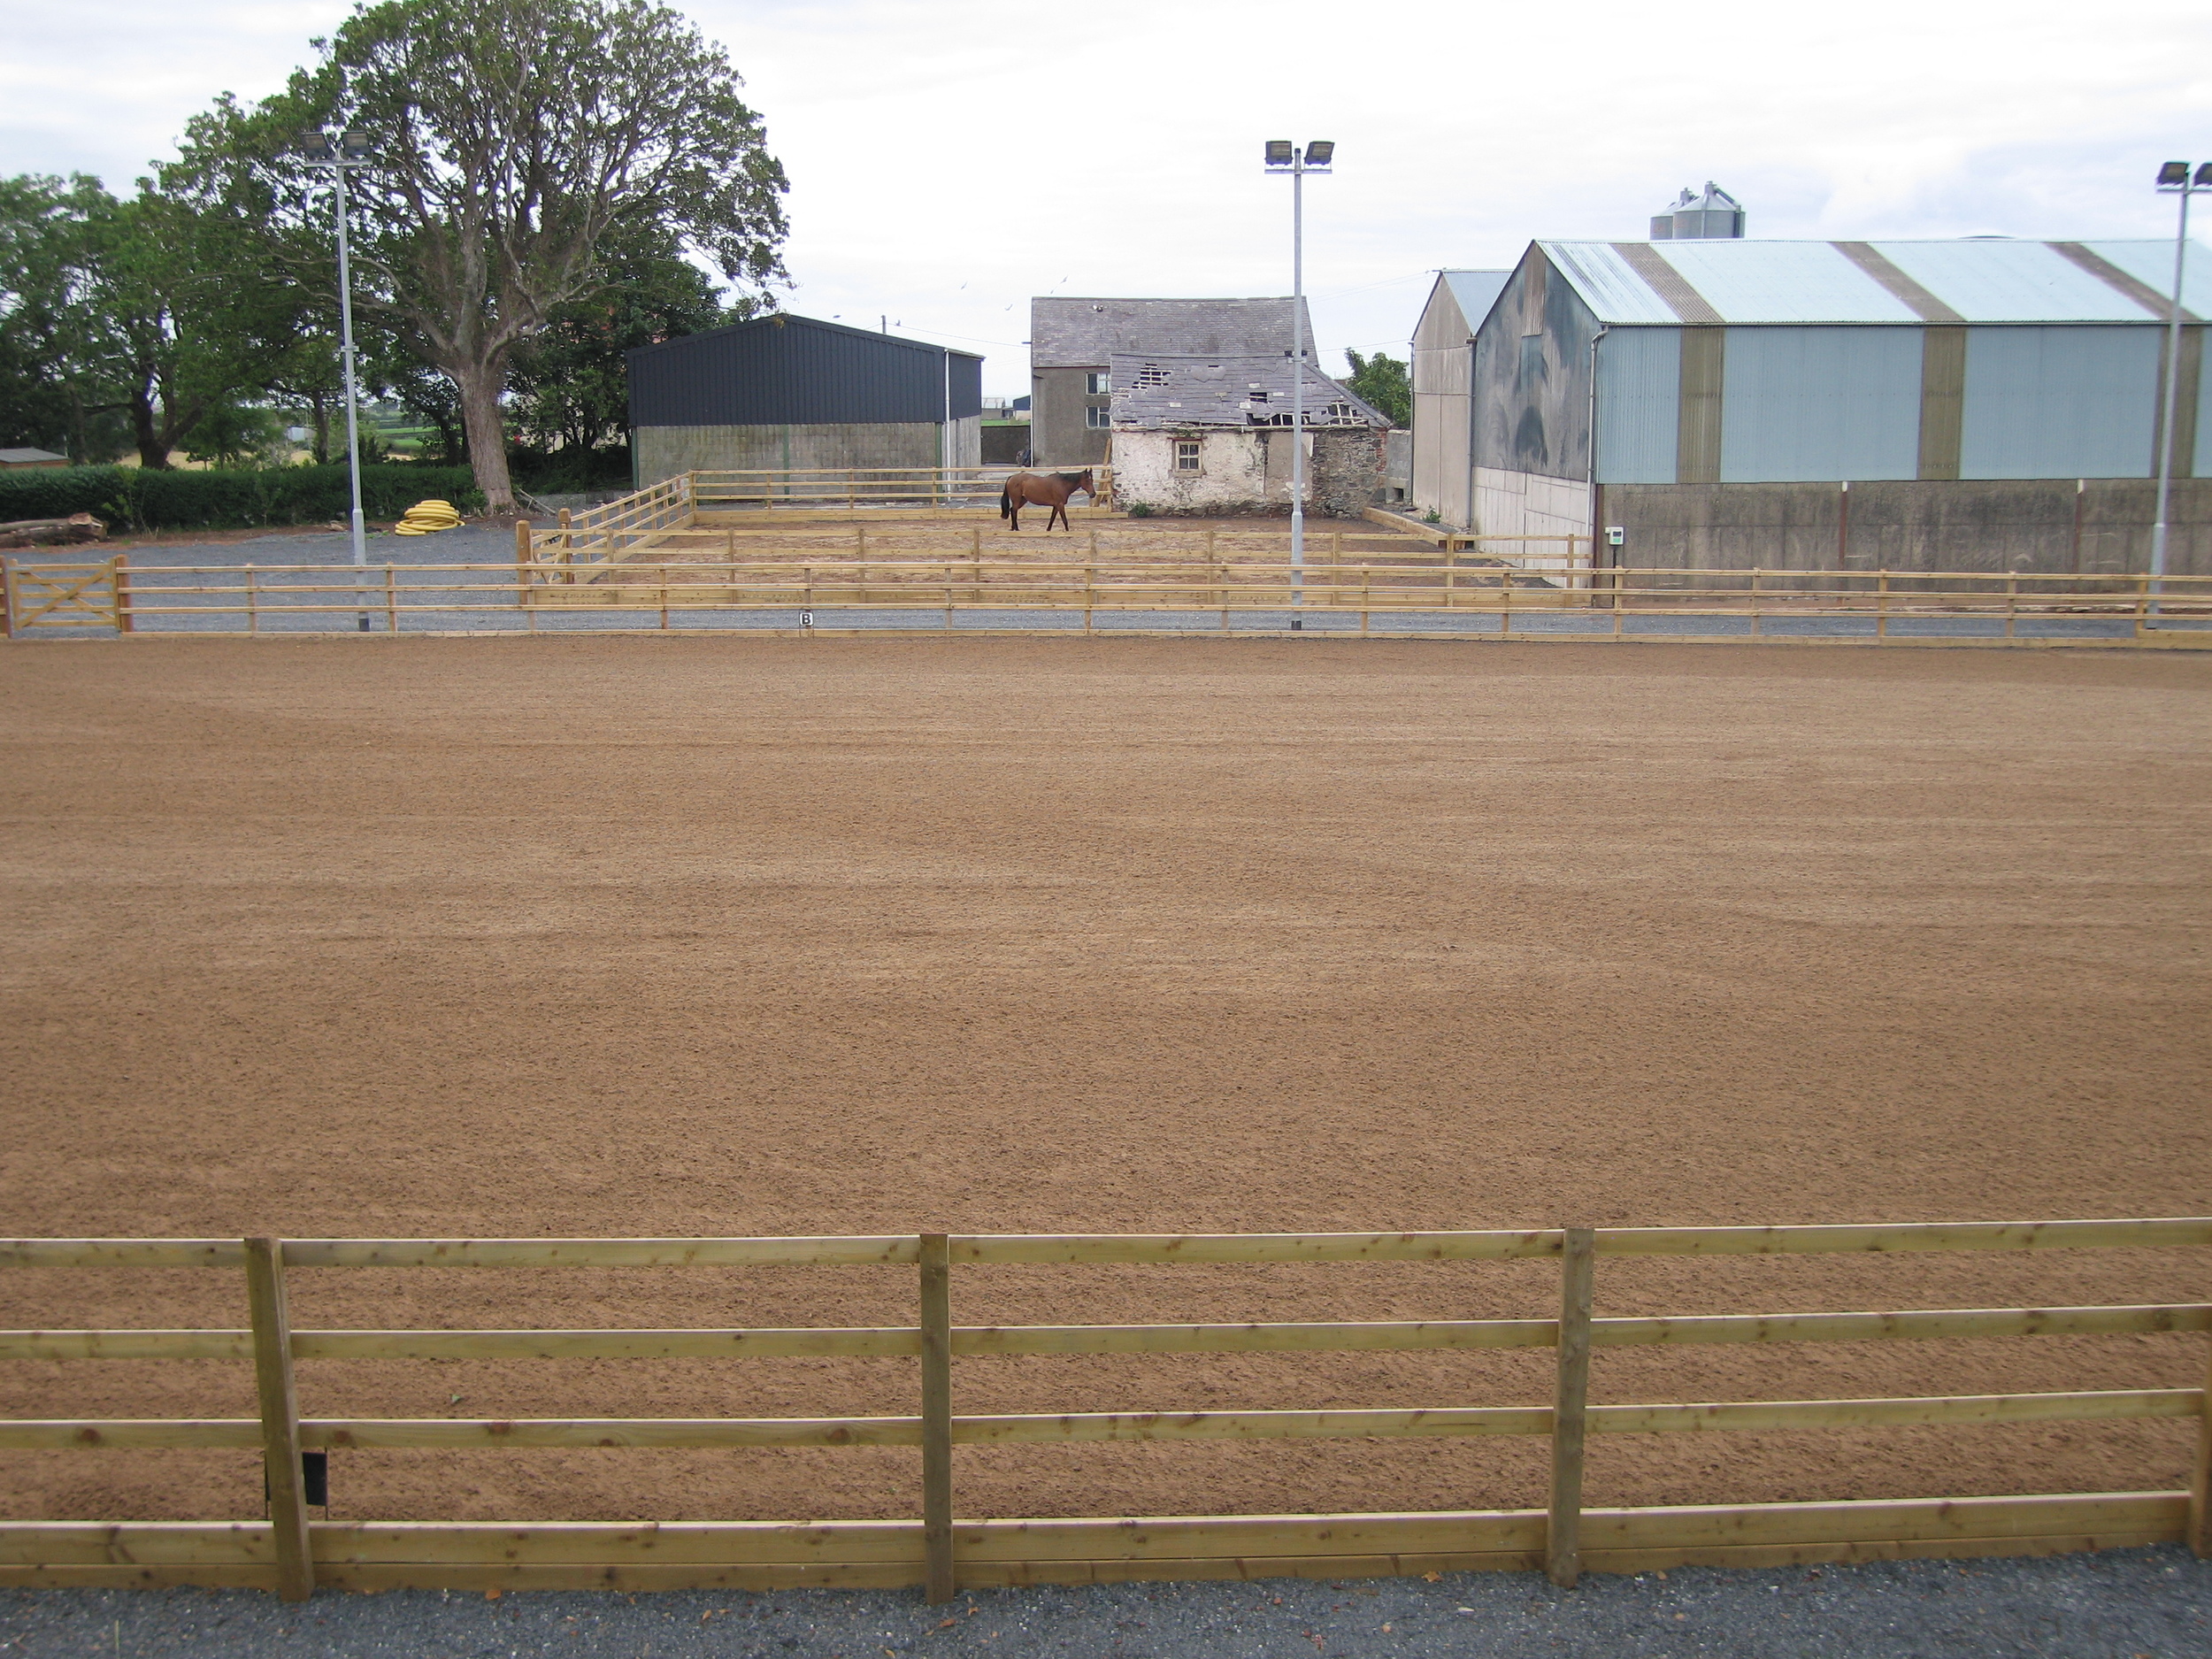 equestrian facilities with arena and lunging pen northern ireland